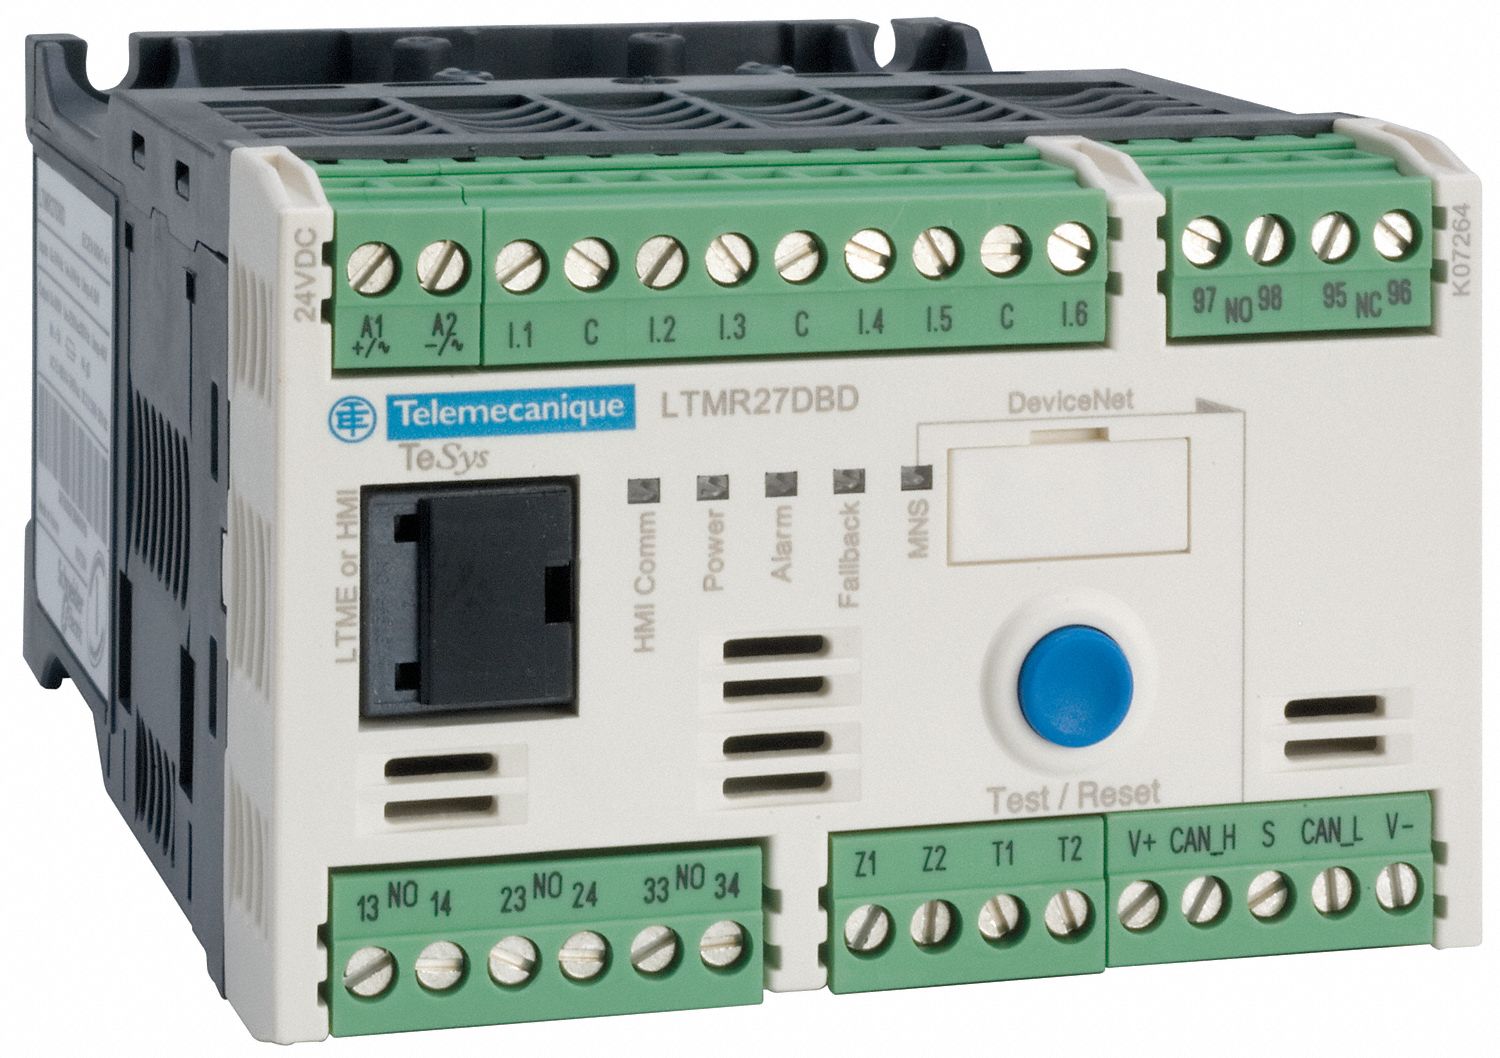 6VLZ0 - Motor Manager DeviceNet 240VAC 0.40-8A